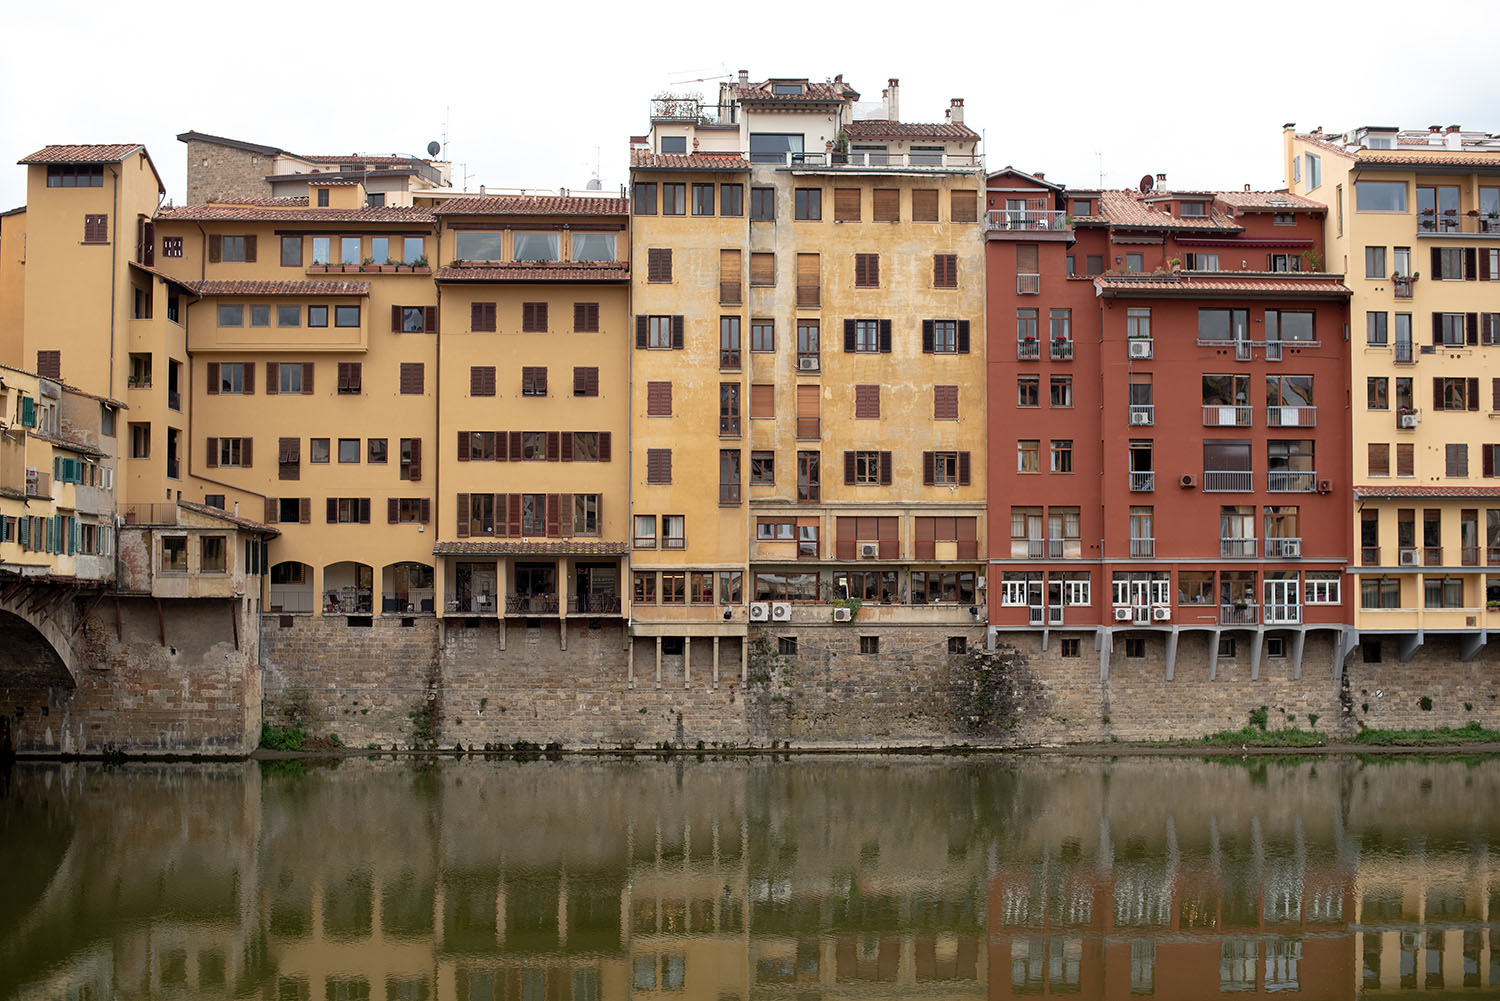 Coco & Vera - Buildings along the Arno River in Florence, Italy